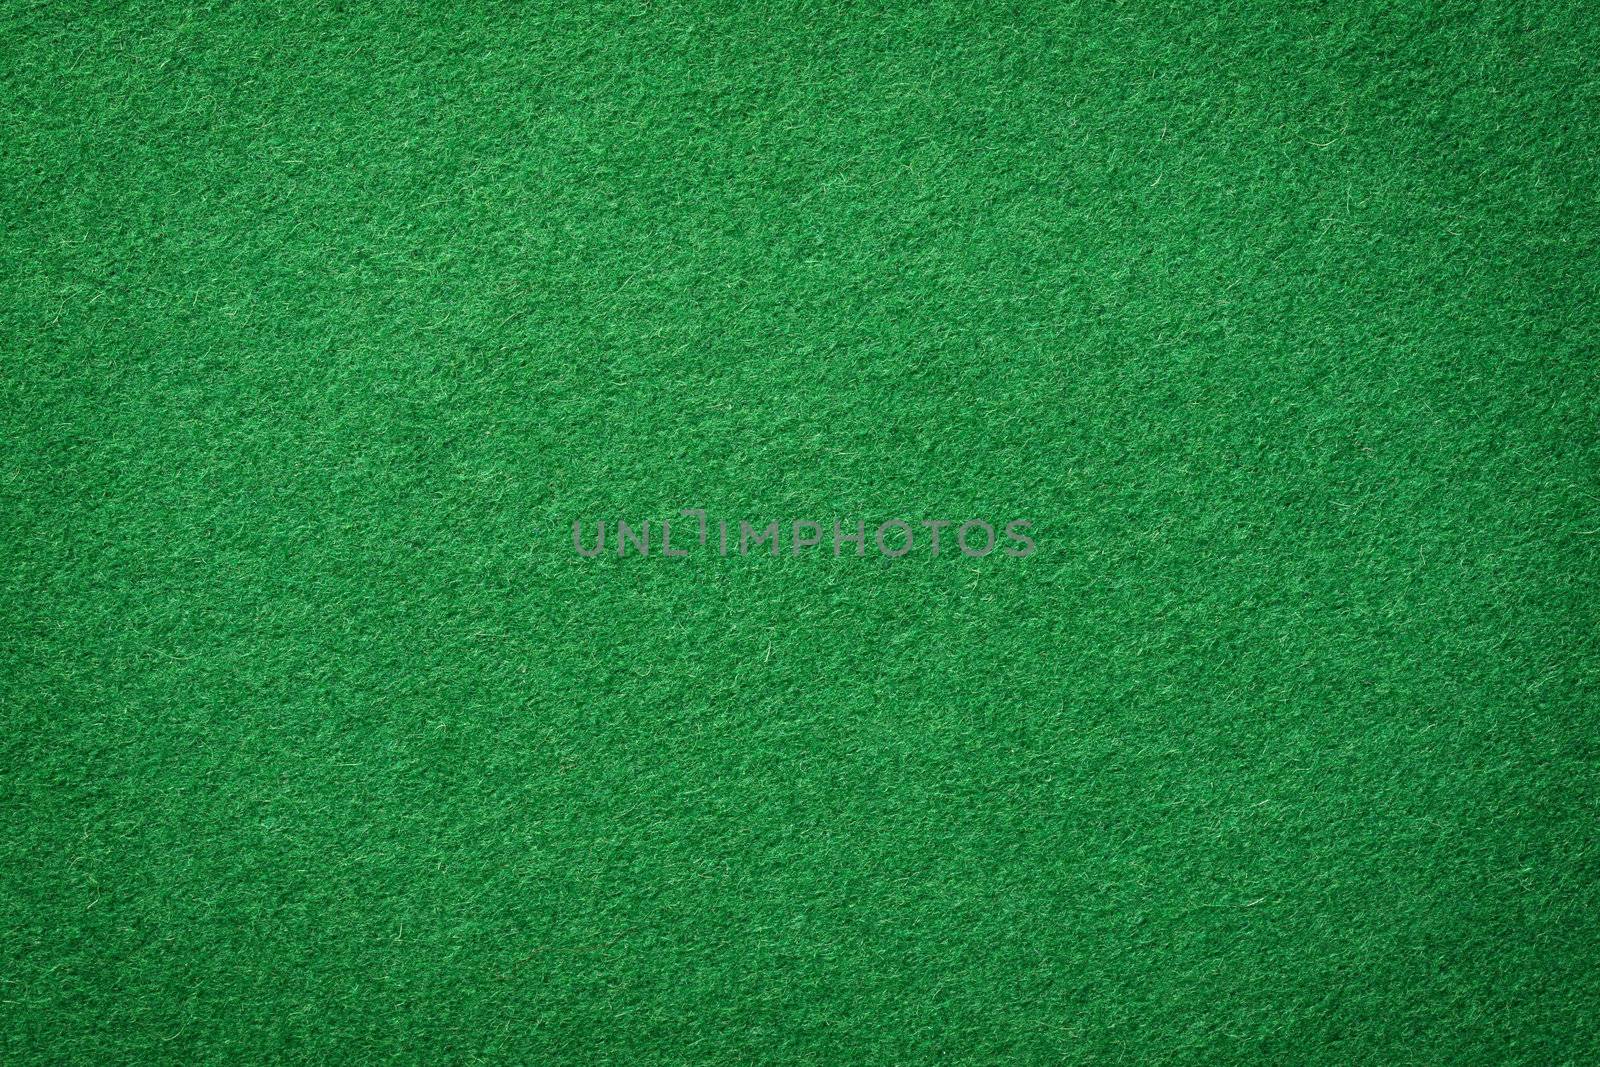 Surface texture of real poker table felt